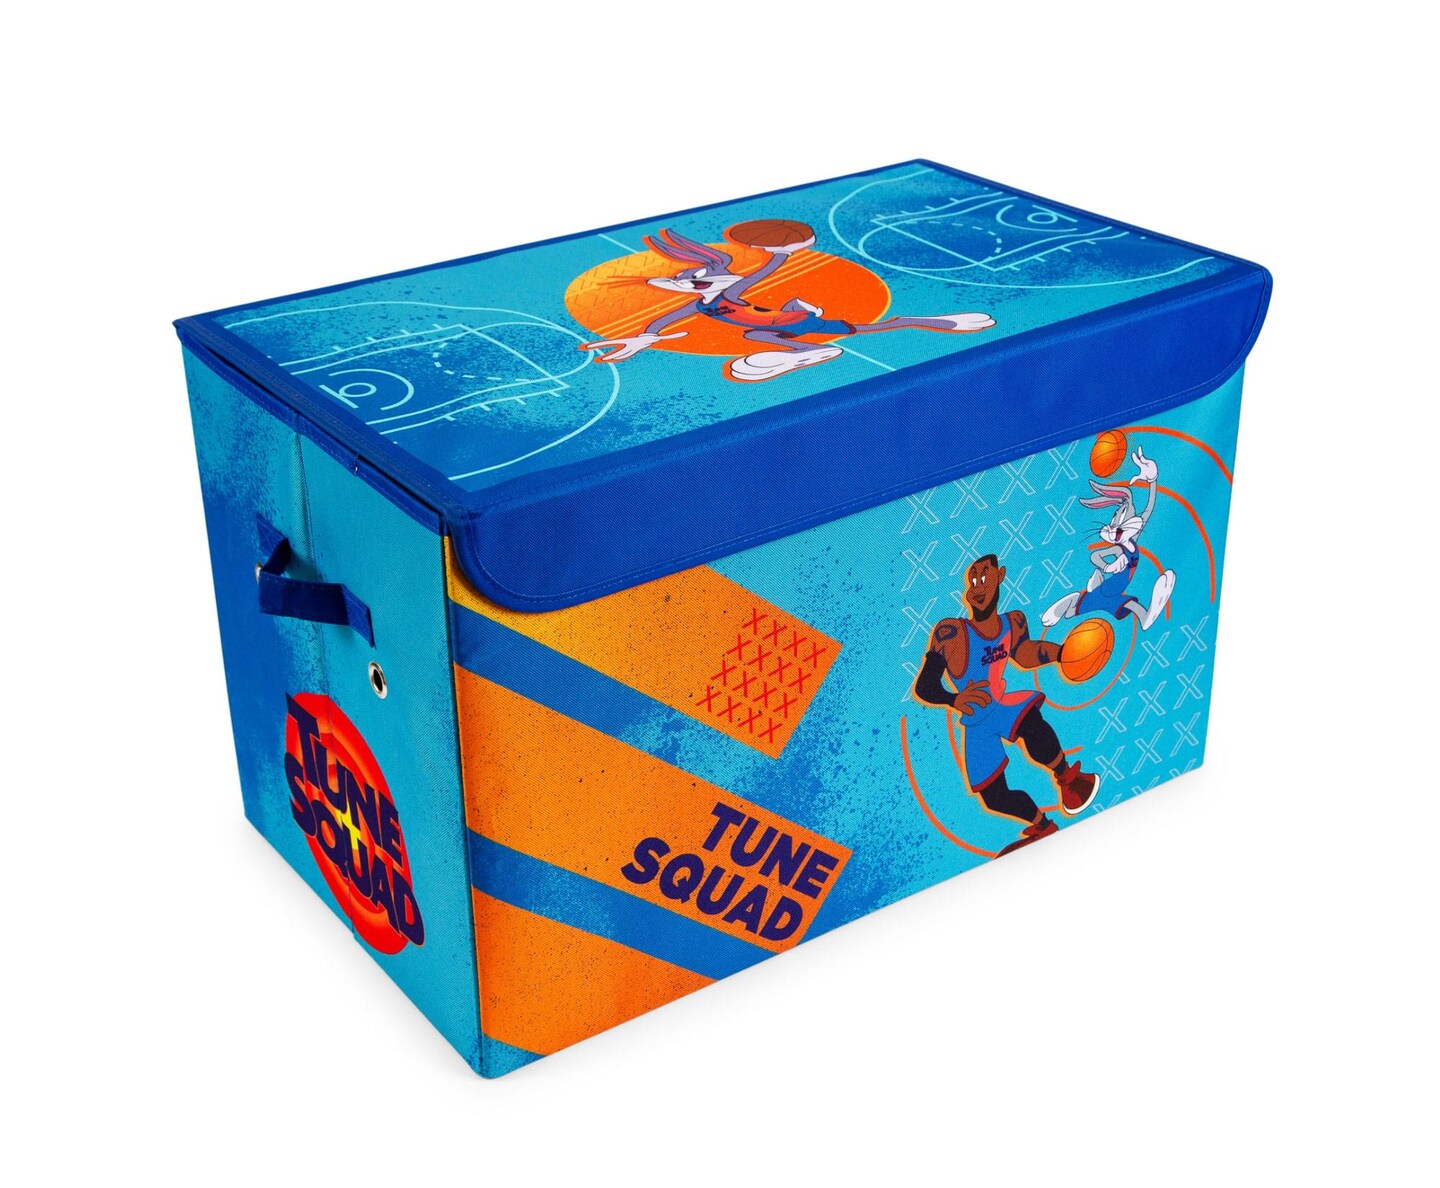 Space Jam: A New Legacy Tune Squad Collapsible Storage Bin Organizer with Lid